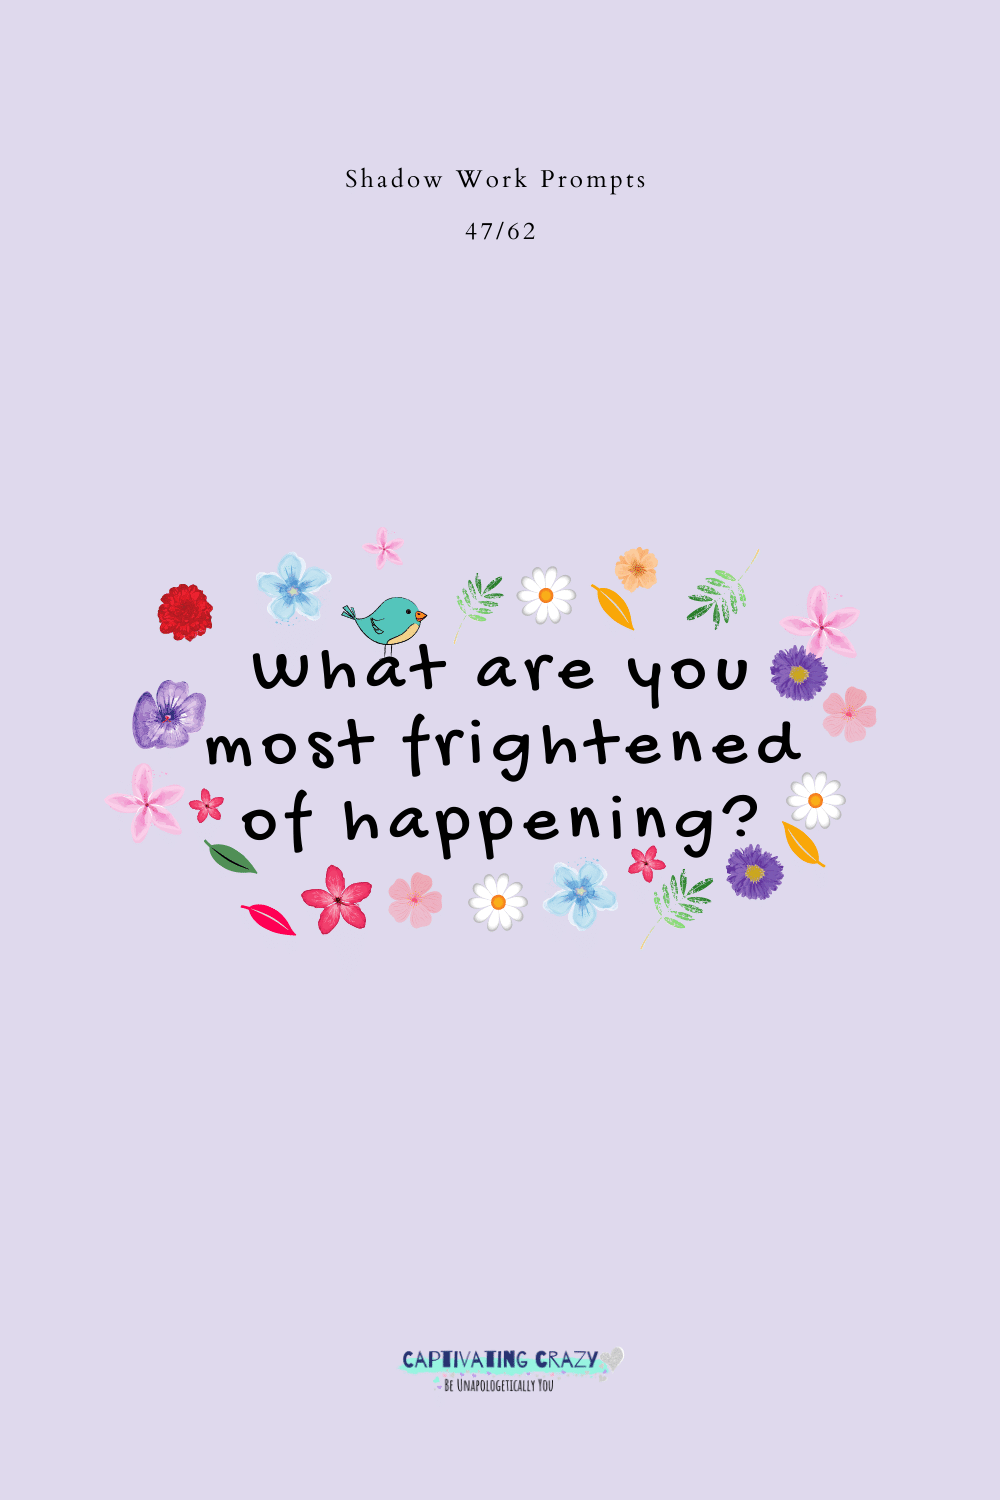 What are you most frightened of happening?